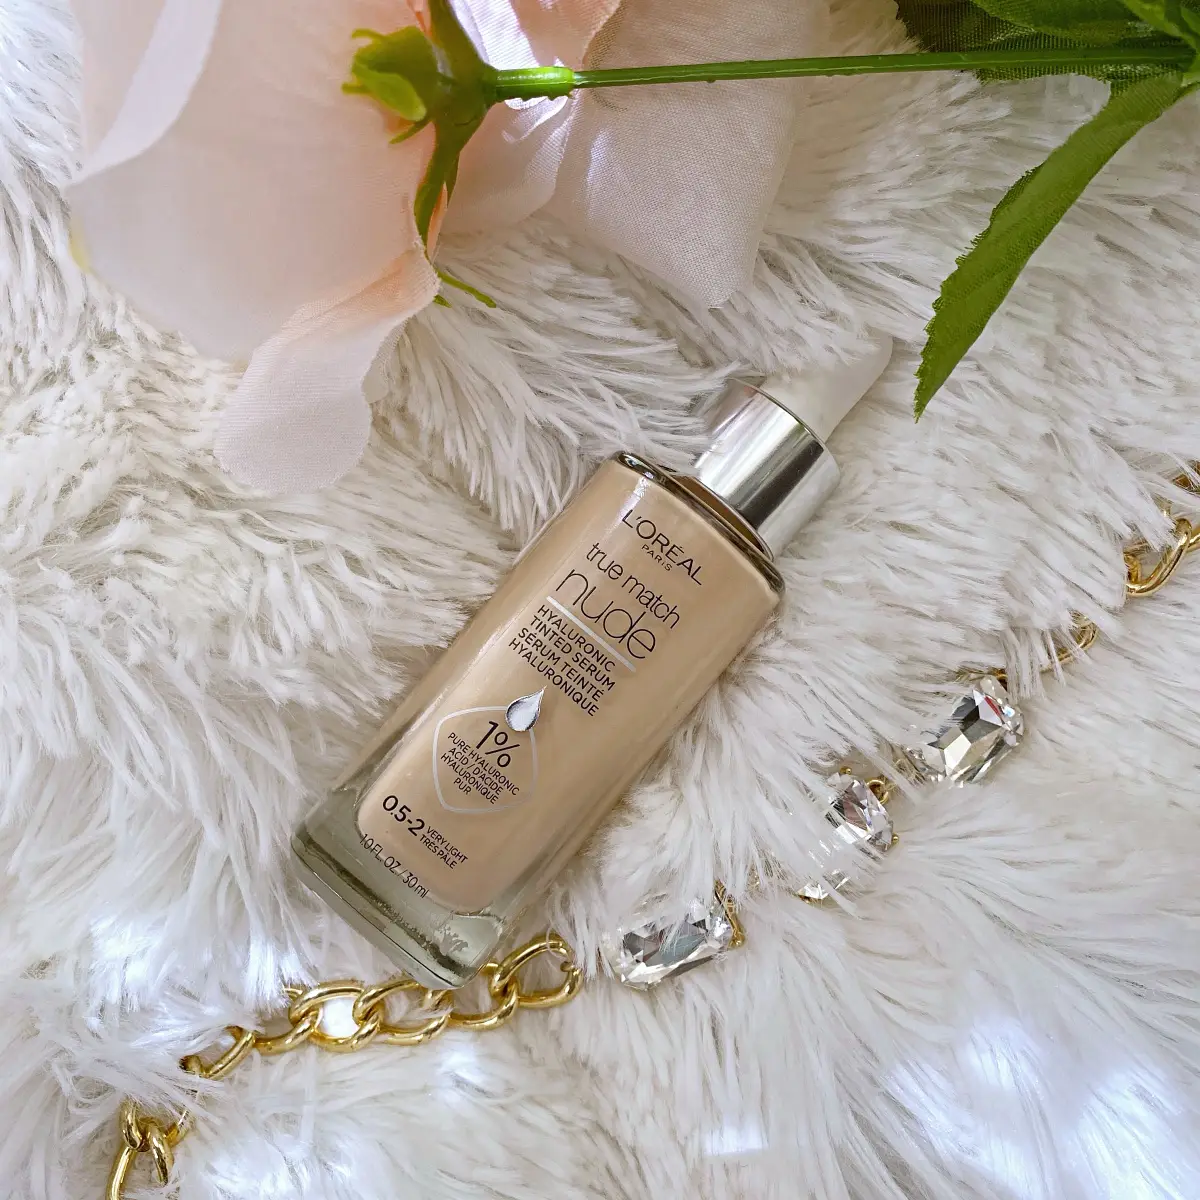 Skinne Anemone fisk Gennemsigtig L'Oreal True Match Hyaluronic Tinted Serum: Raving Review